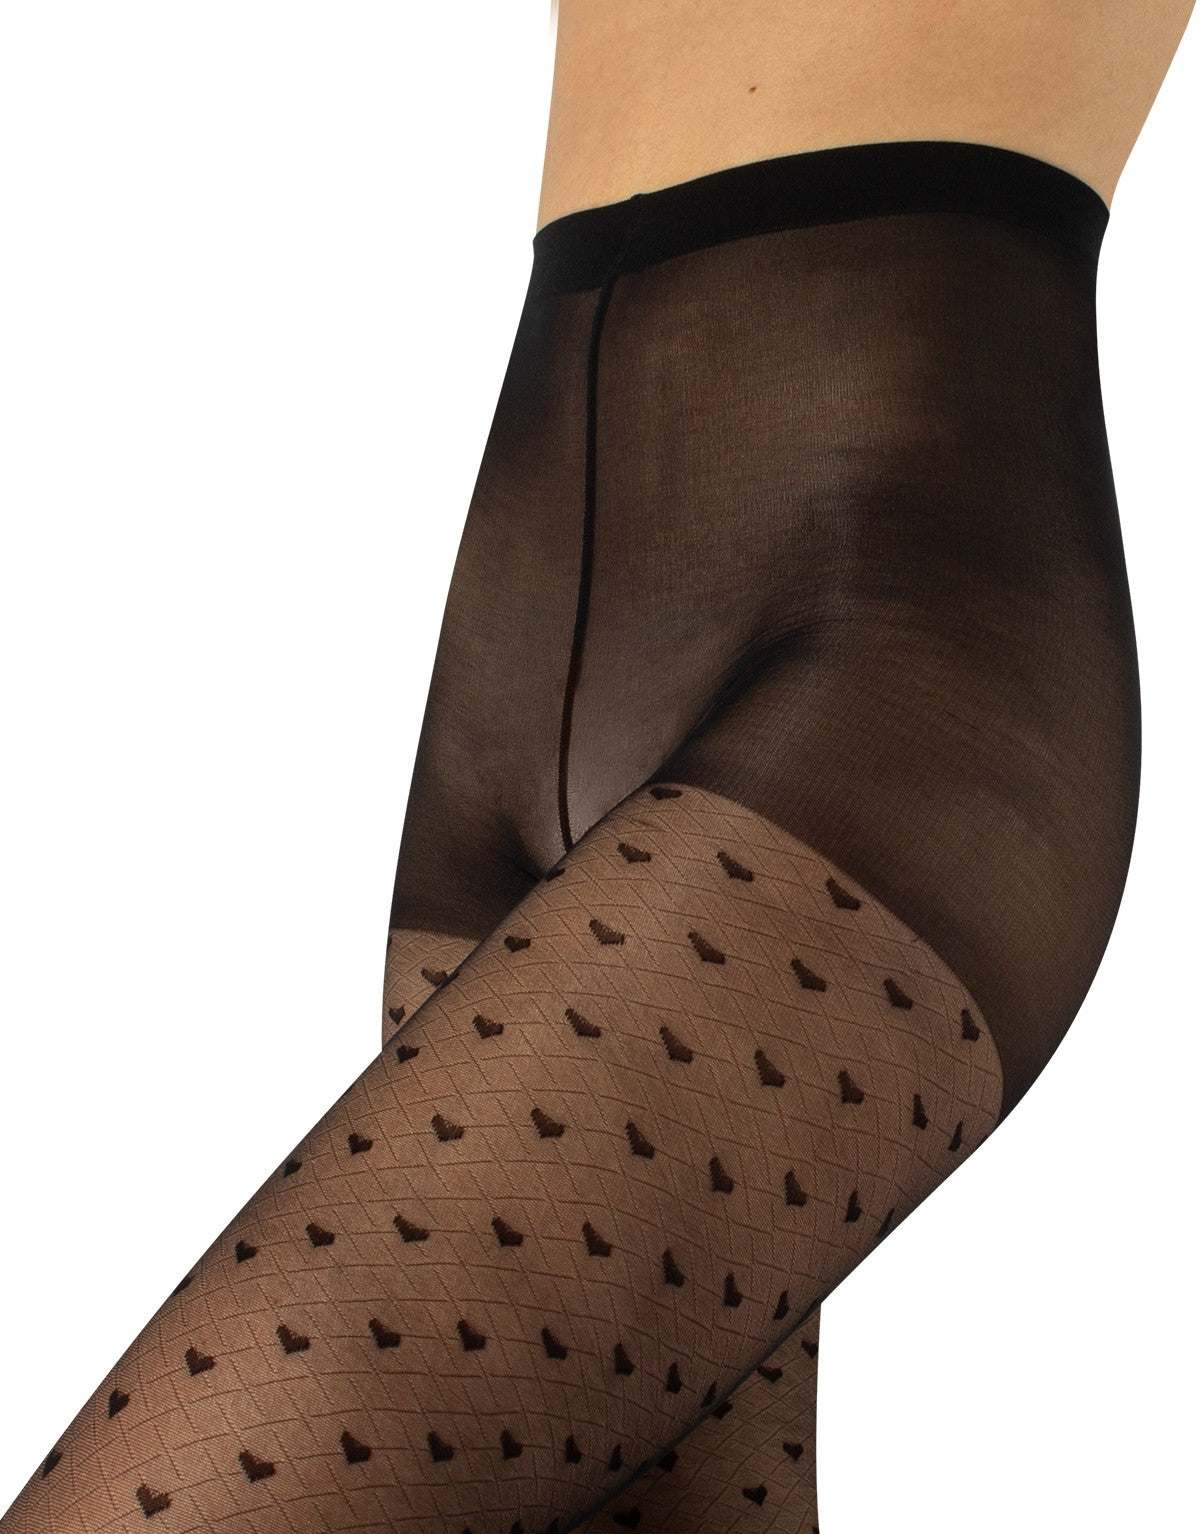 Calzitaly Heart Tights - Sheer black fashion tights with a light diamond fishnet effect with all over hearts pattern, plain opaque boxer brief, deep waistband, flat seams and cotton gusset.